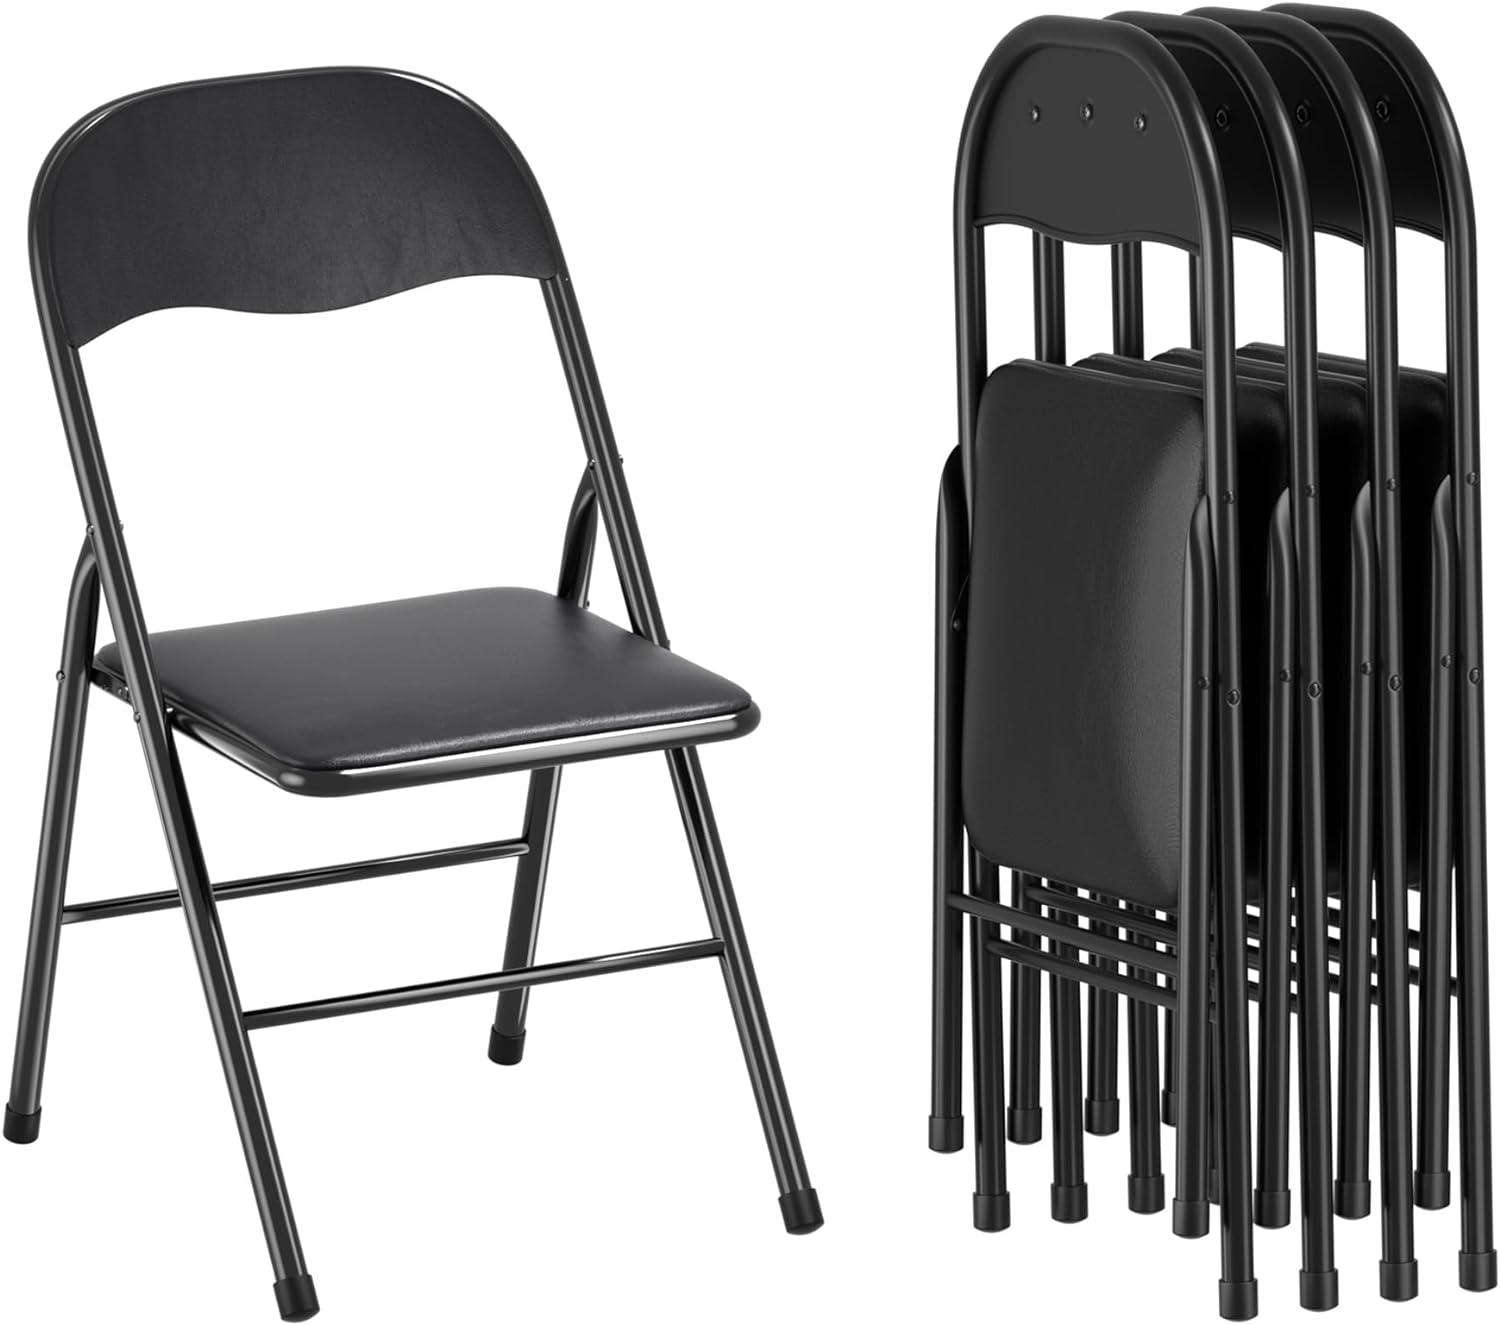 VECELO Folding Chairs 4 Pack Metal Portable with Soft PU Padded Seats